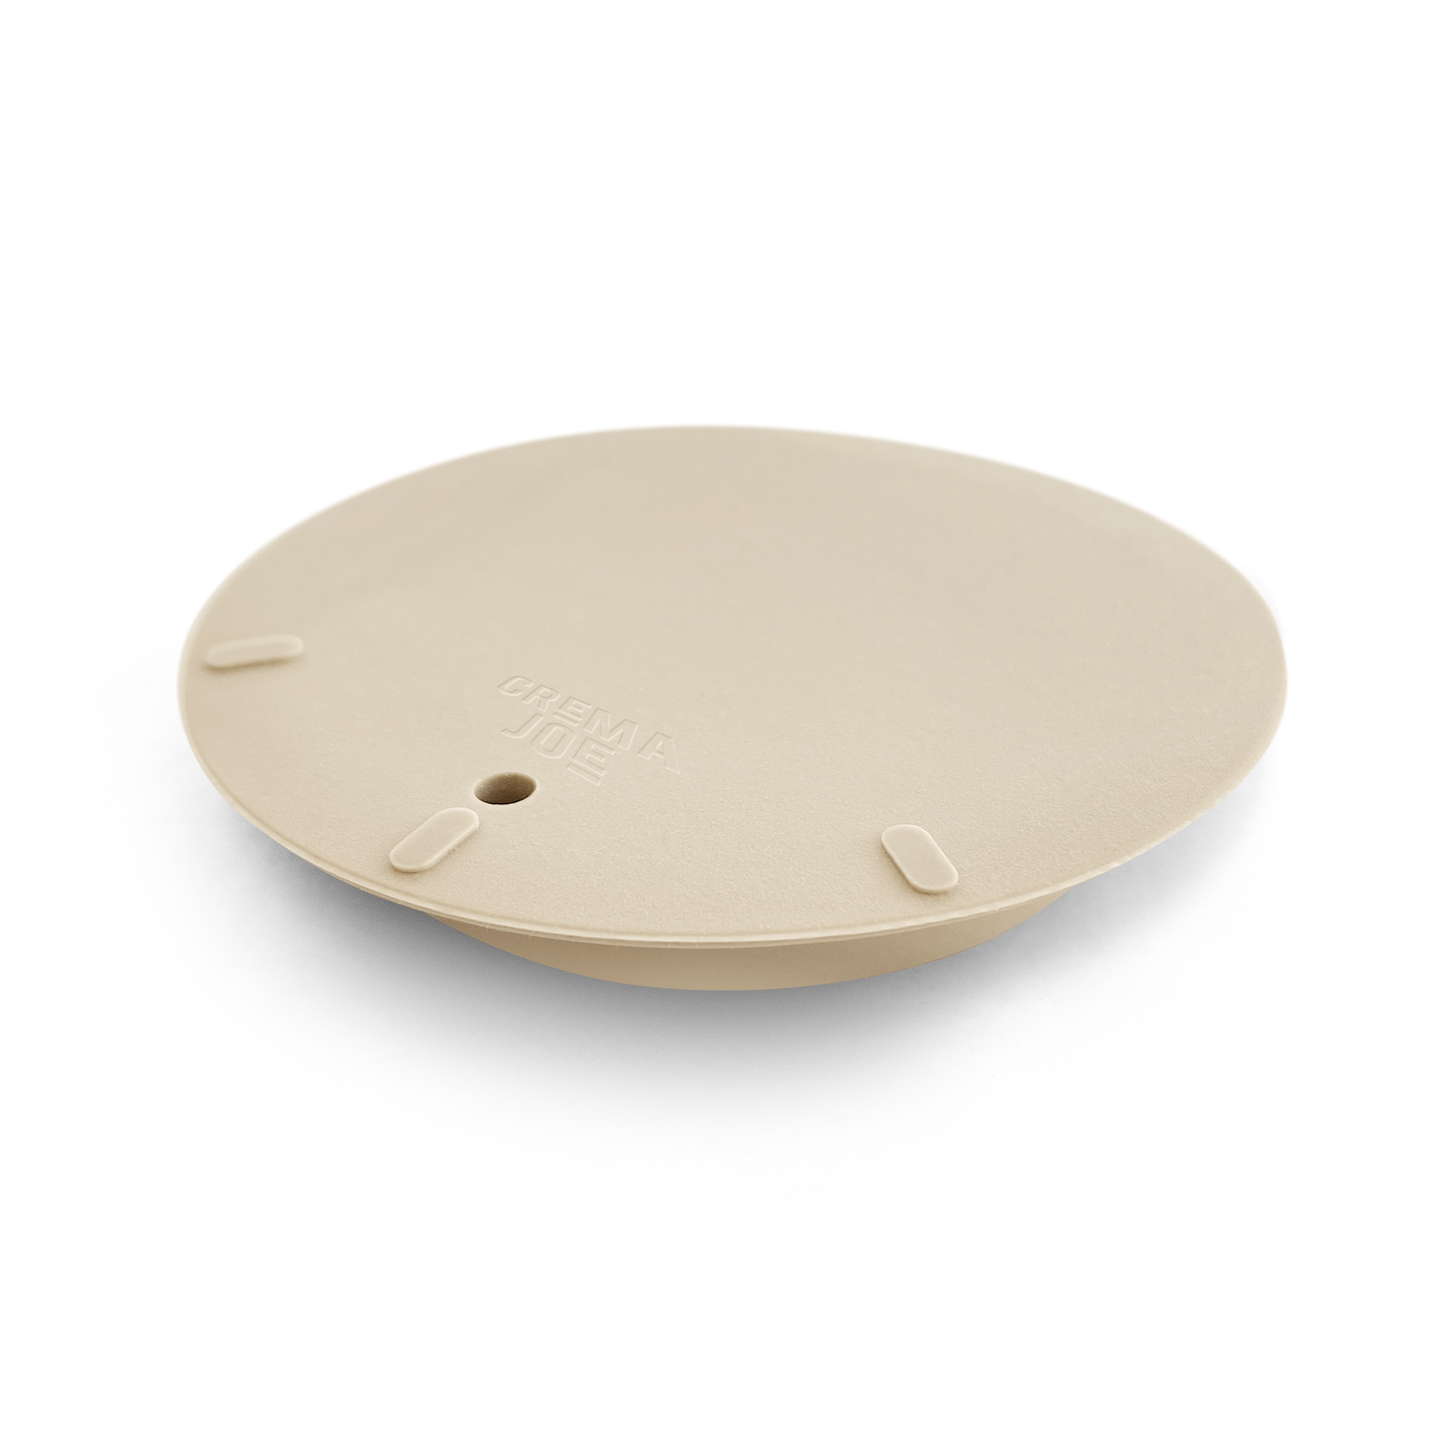 WayCap Lid for reusing / refilling Dolce Gusto capsules